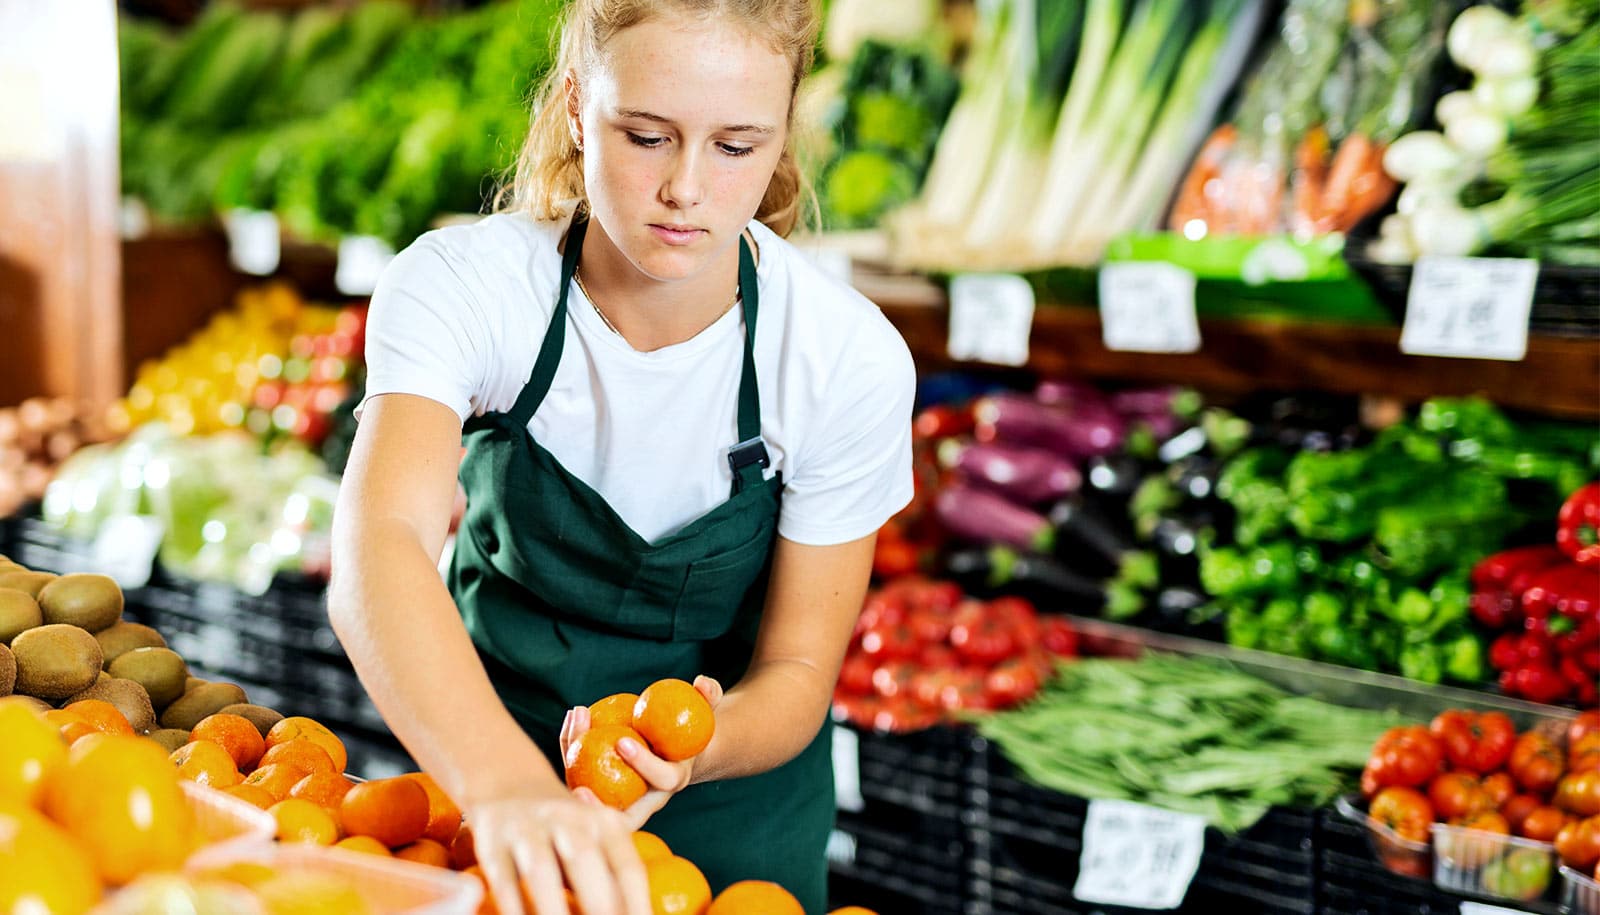 A young woman working as a grocery produce stocker.